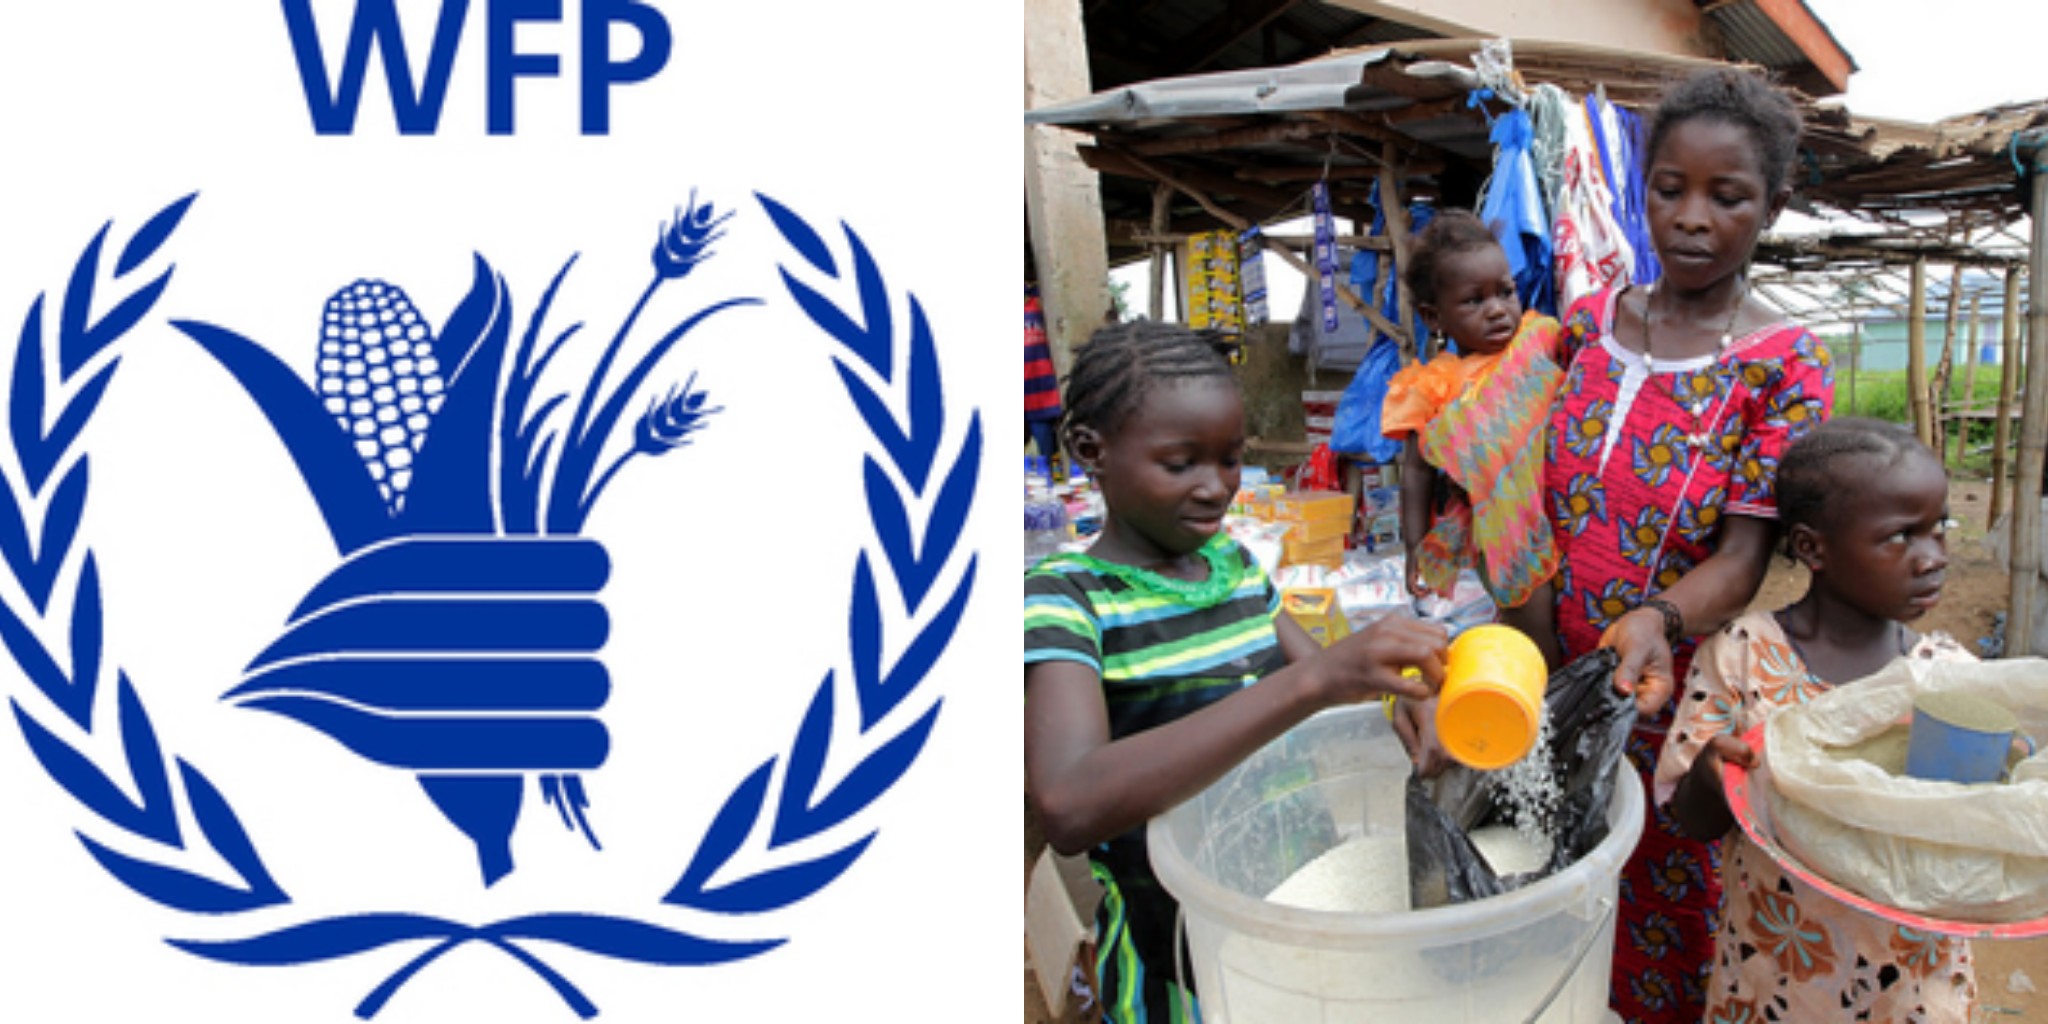 WFP Aid Relieved Thousands as Hunger Increases in Sierra Leone